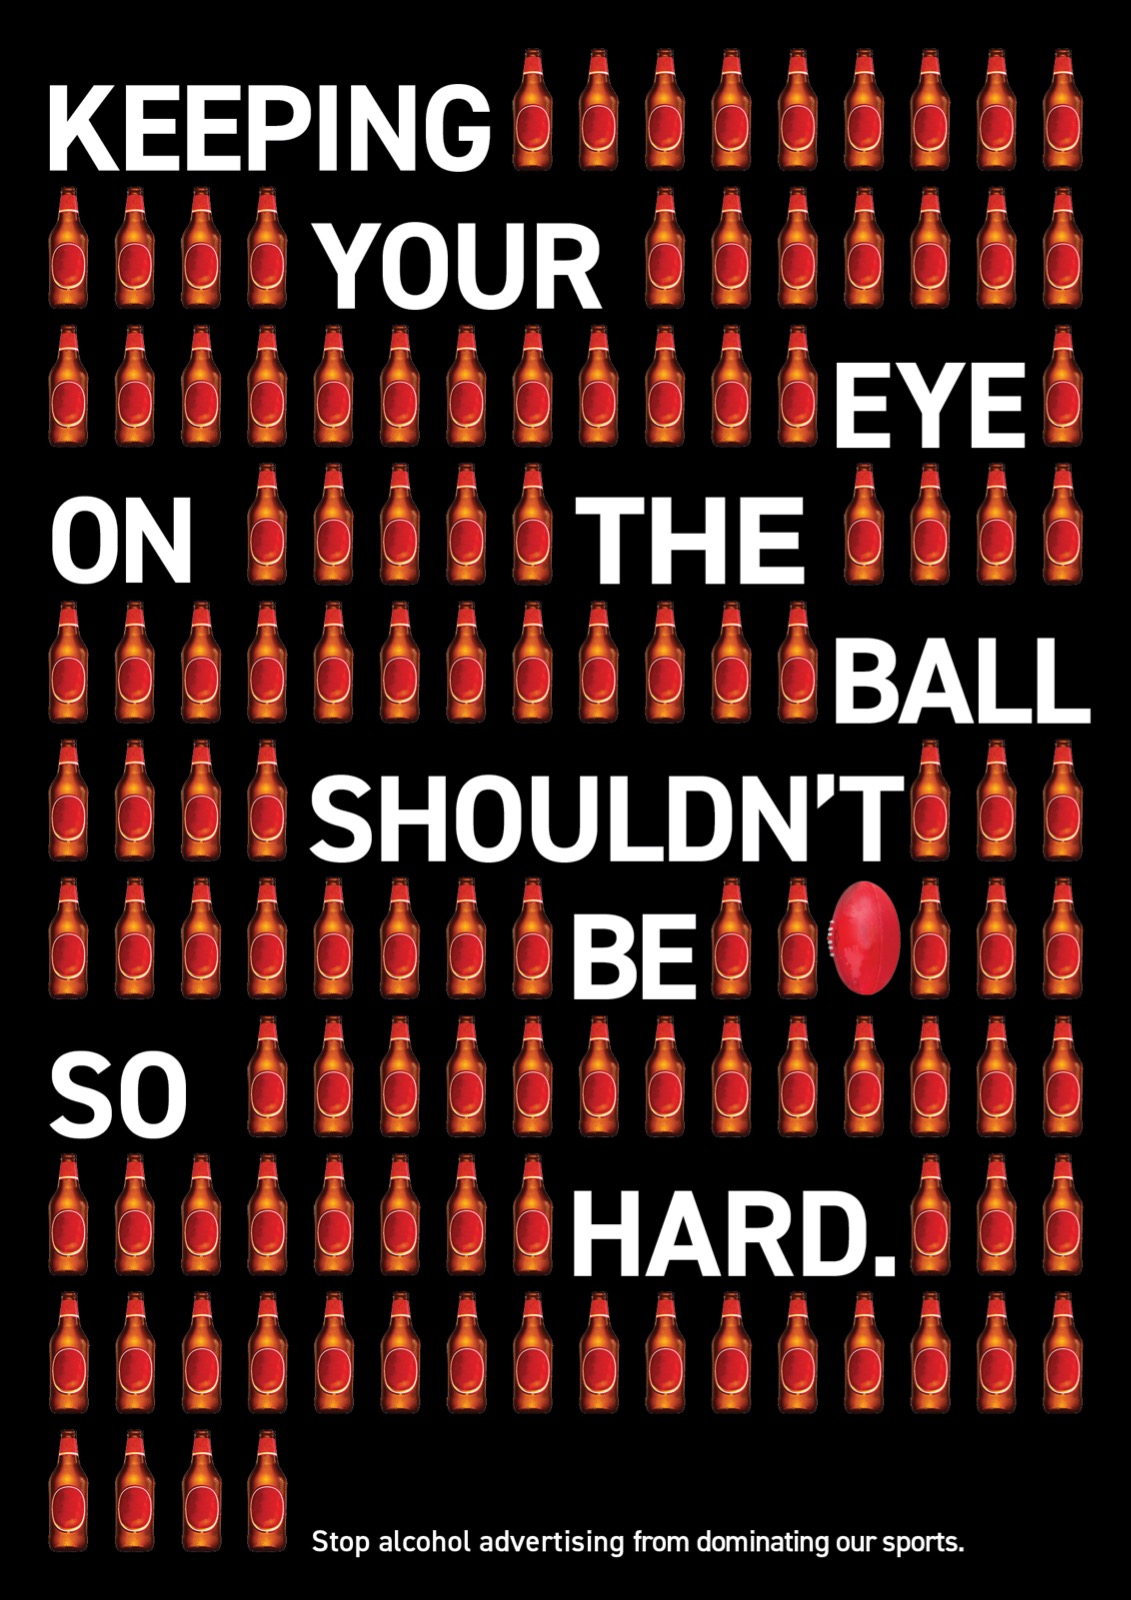 A poster showing rows of beers, with one AFL football hiding in one of the rows. The text reads "Keeping your eye on the ball shouldn't be so hard. Stop alcohol advertising from dominating our sports."